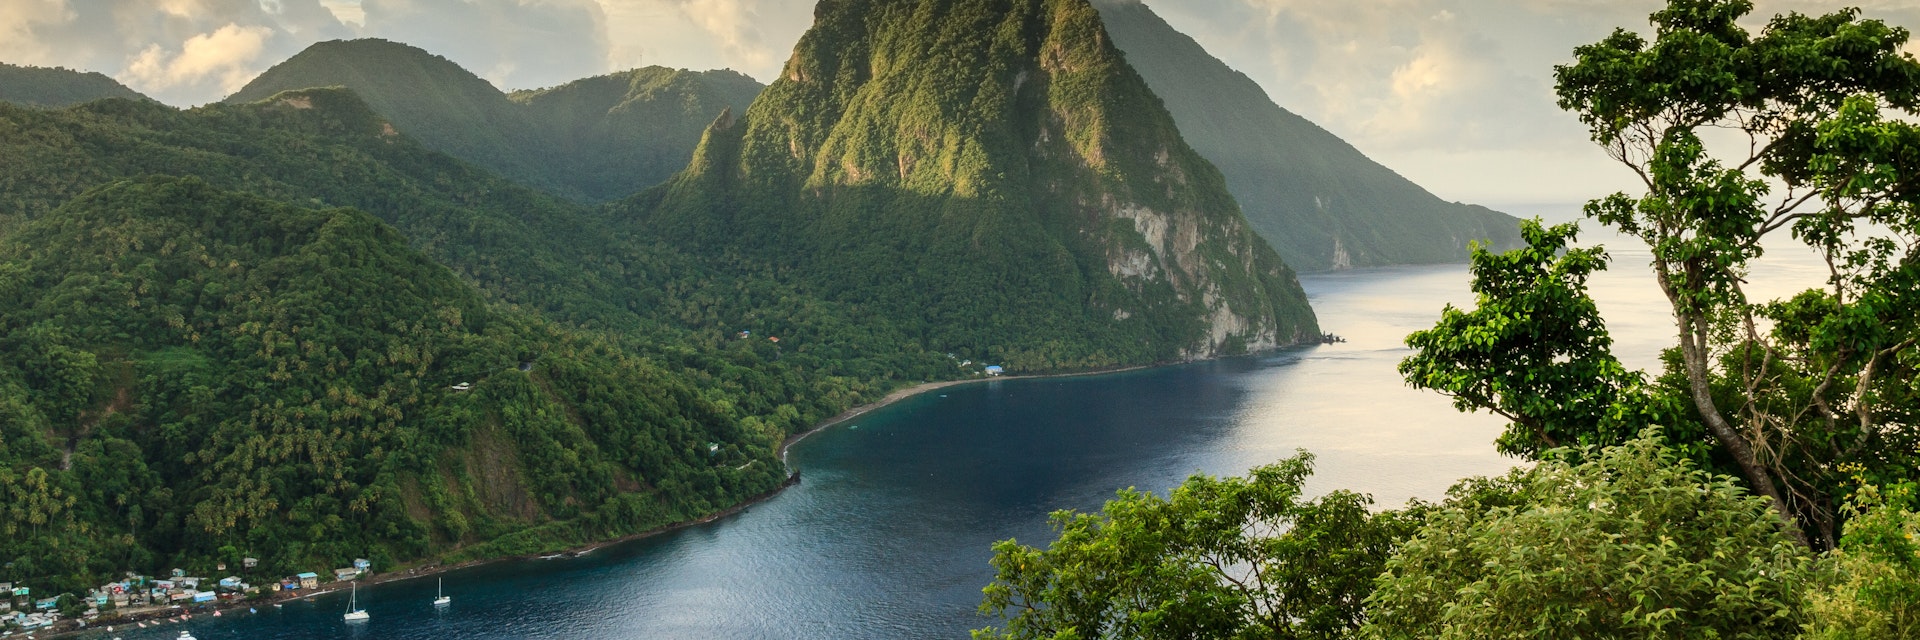 View of the Pitons (Petit Piton & Gros Piton) from an elevated viewpoint with the rainforest and bay of Soufrière in the foreground.